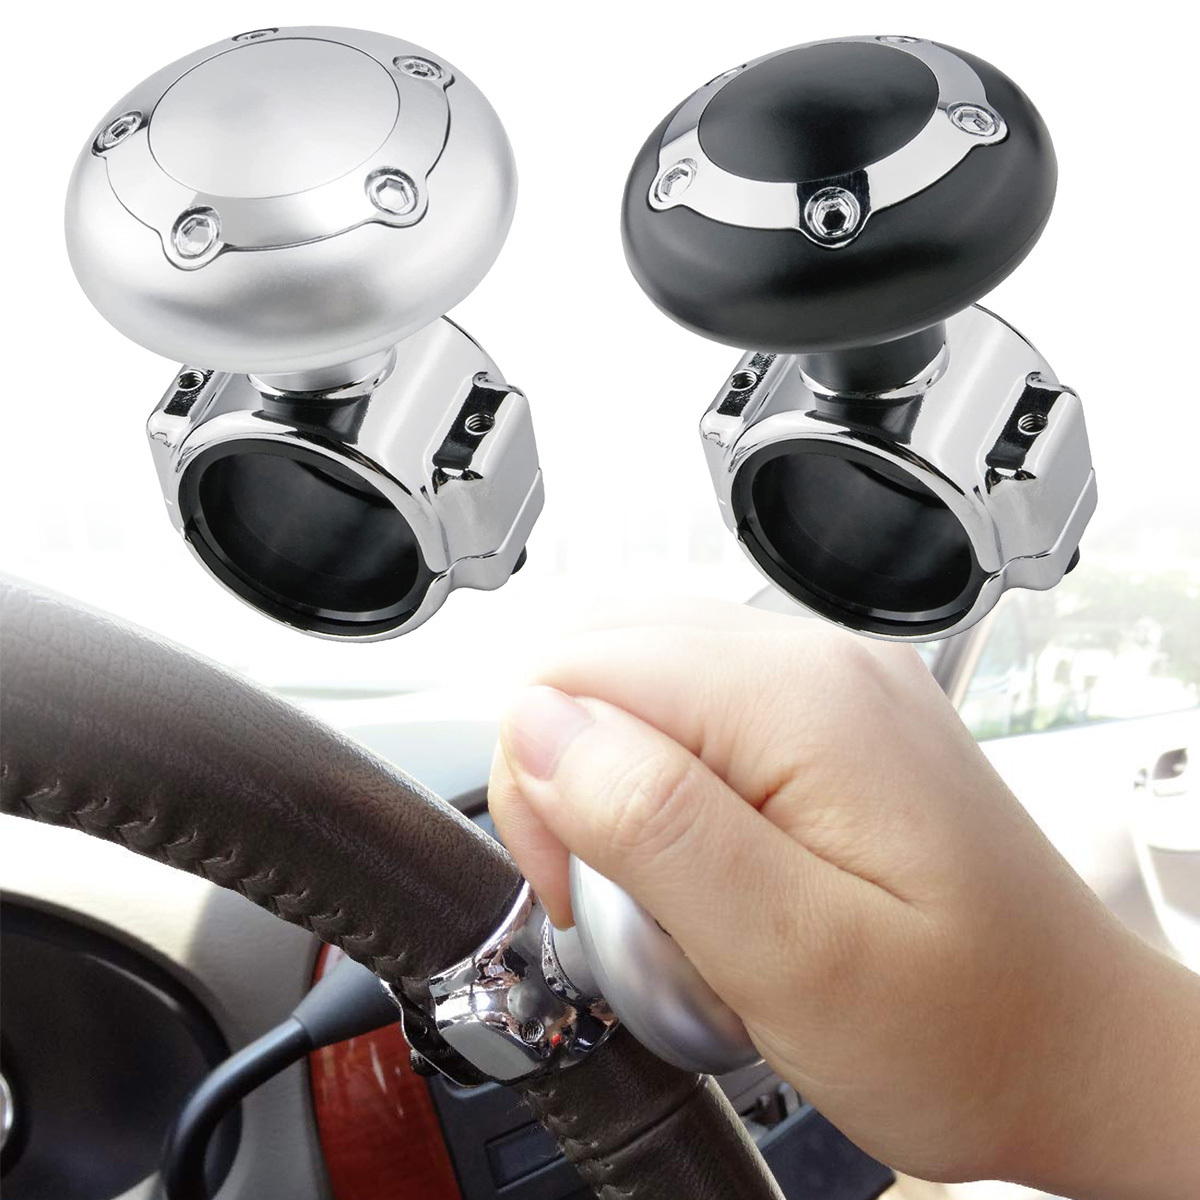  Hypersonic Large Steering Wheel Knob Spinners, Universal  Vehicle Steering Wheel Spinners Ball Suicide Knob for Car, Trucks,  Tractors, Boat : Automotive